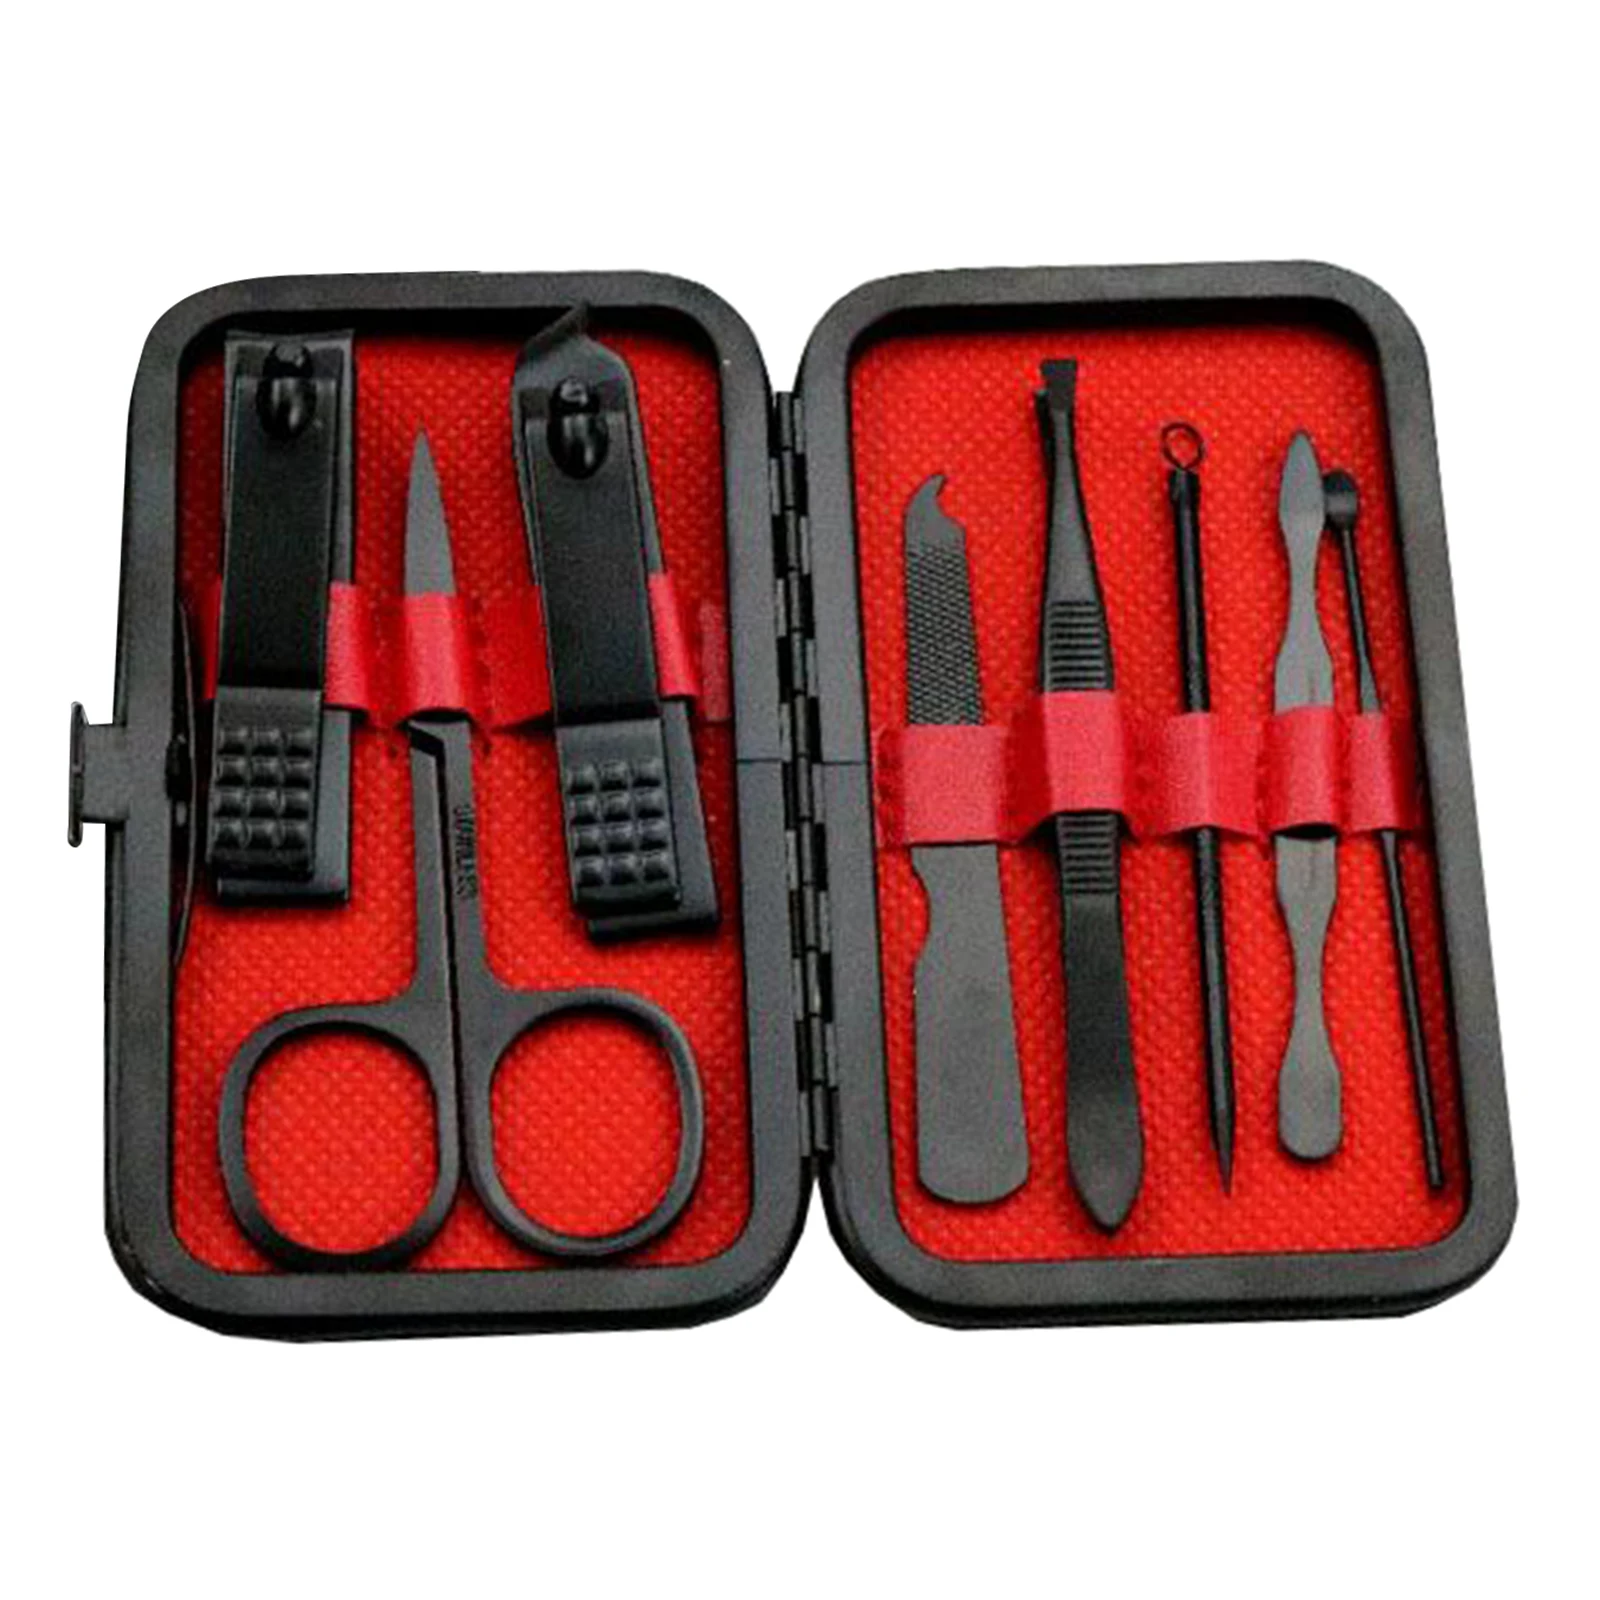 Professional Manicure Stainless Steel Pedicure Care Tool Set in a Leather Box